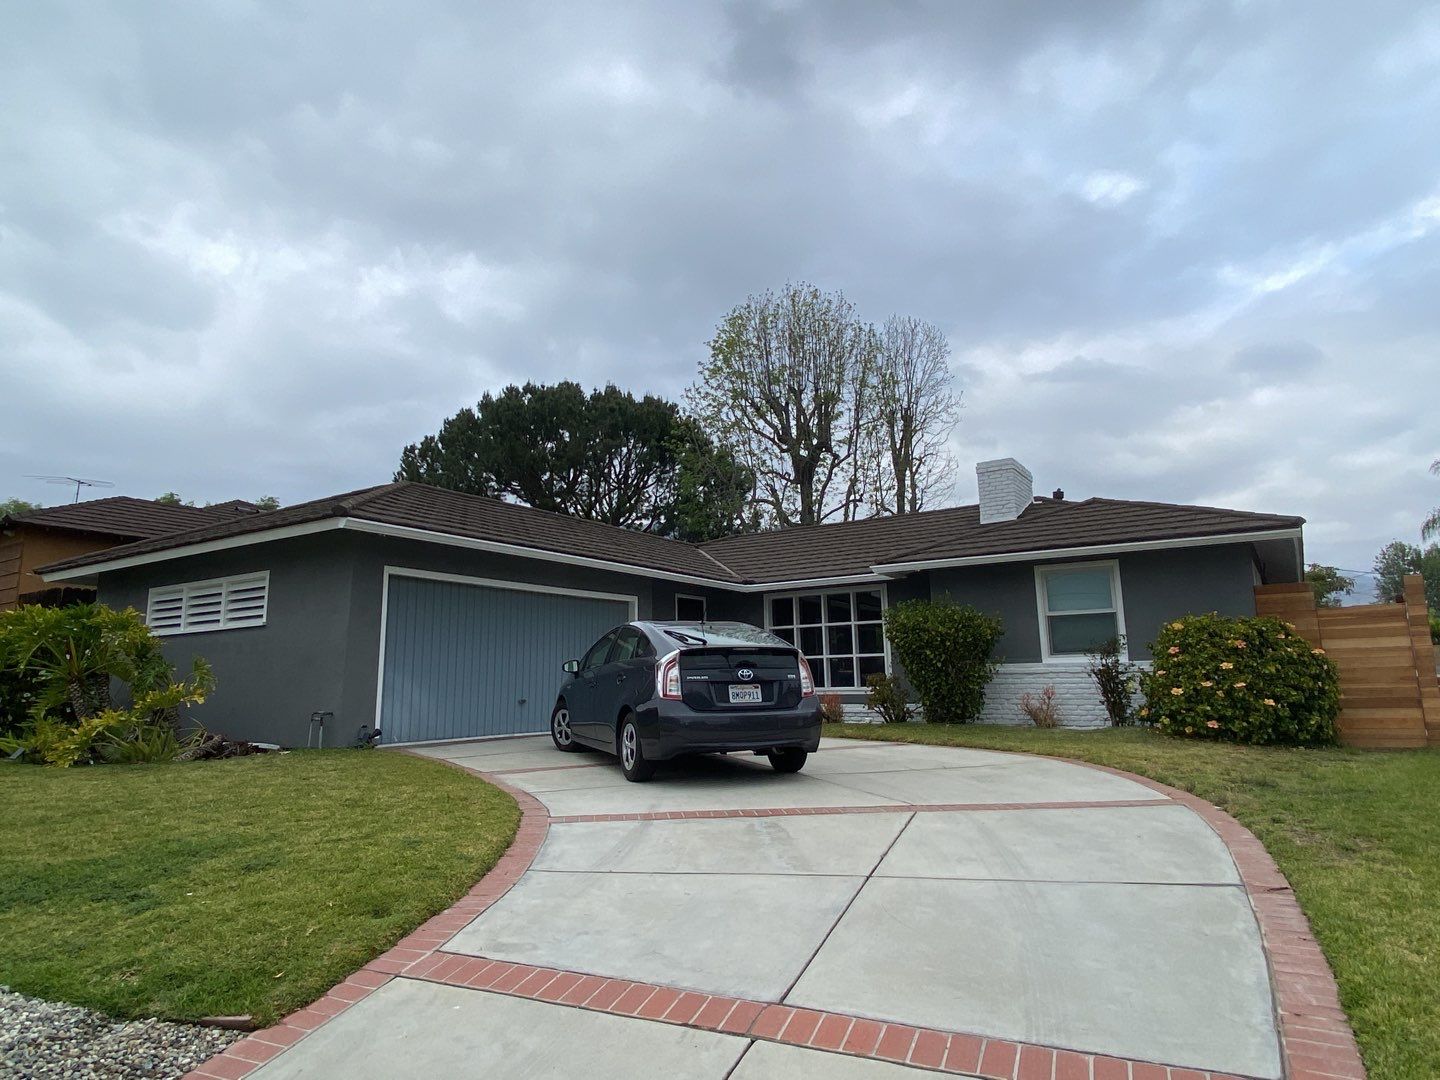 Exterior Painting Project in South Pasadena, CA